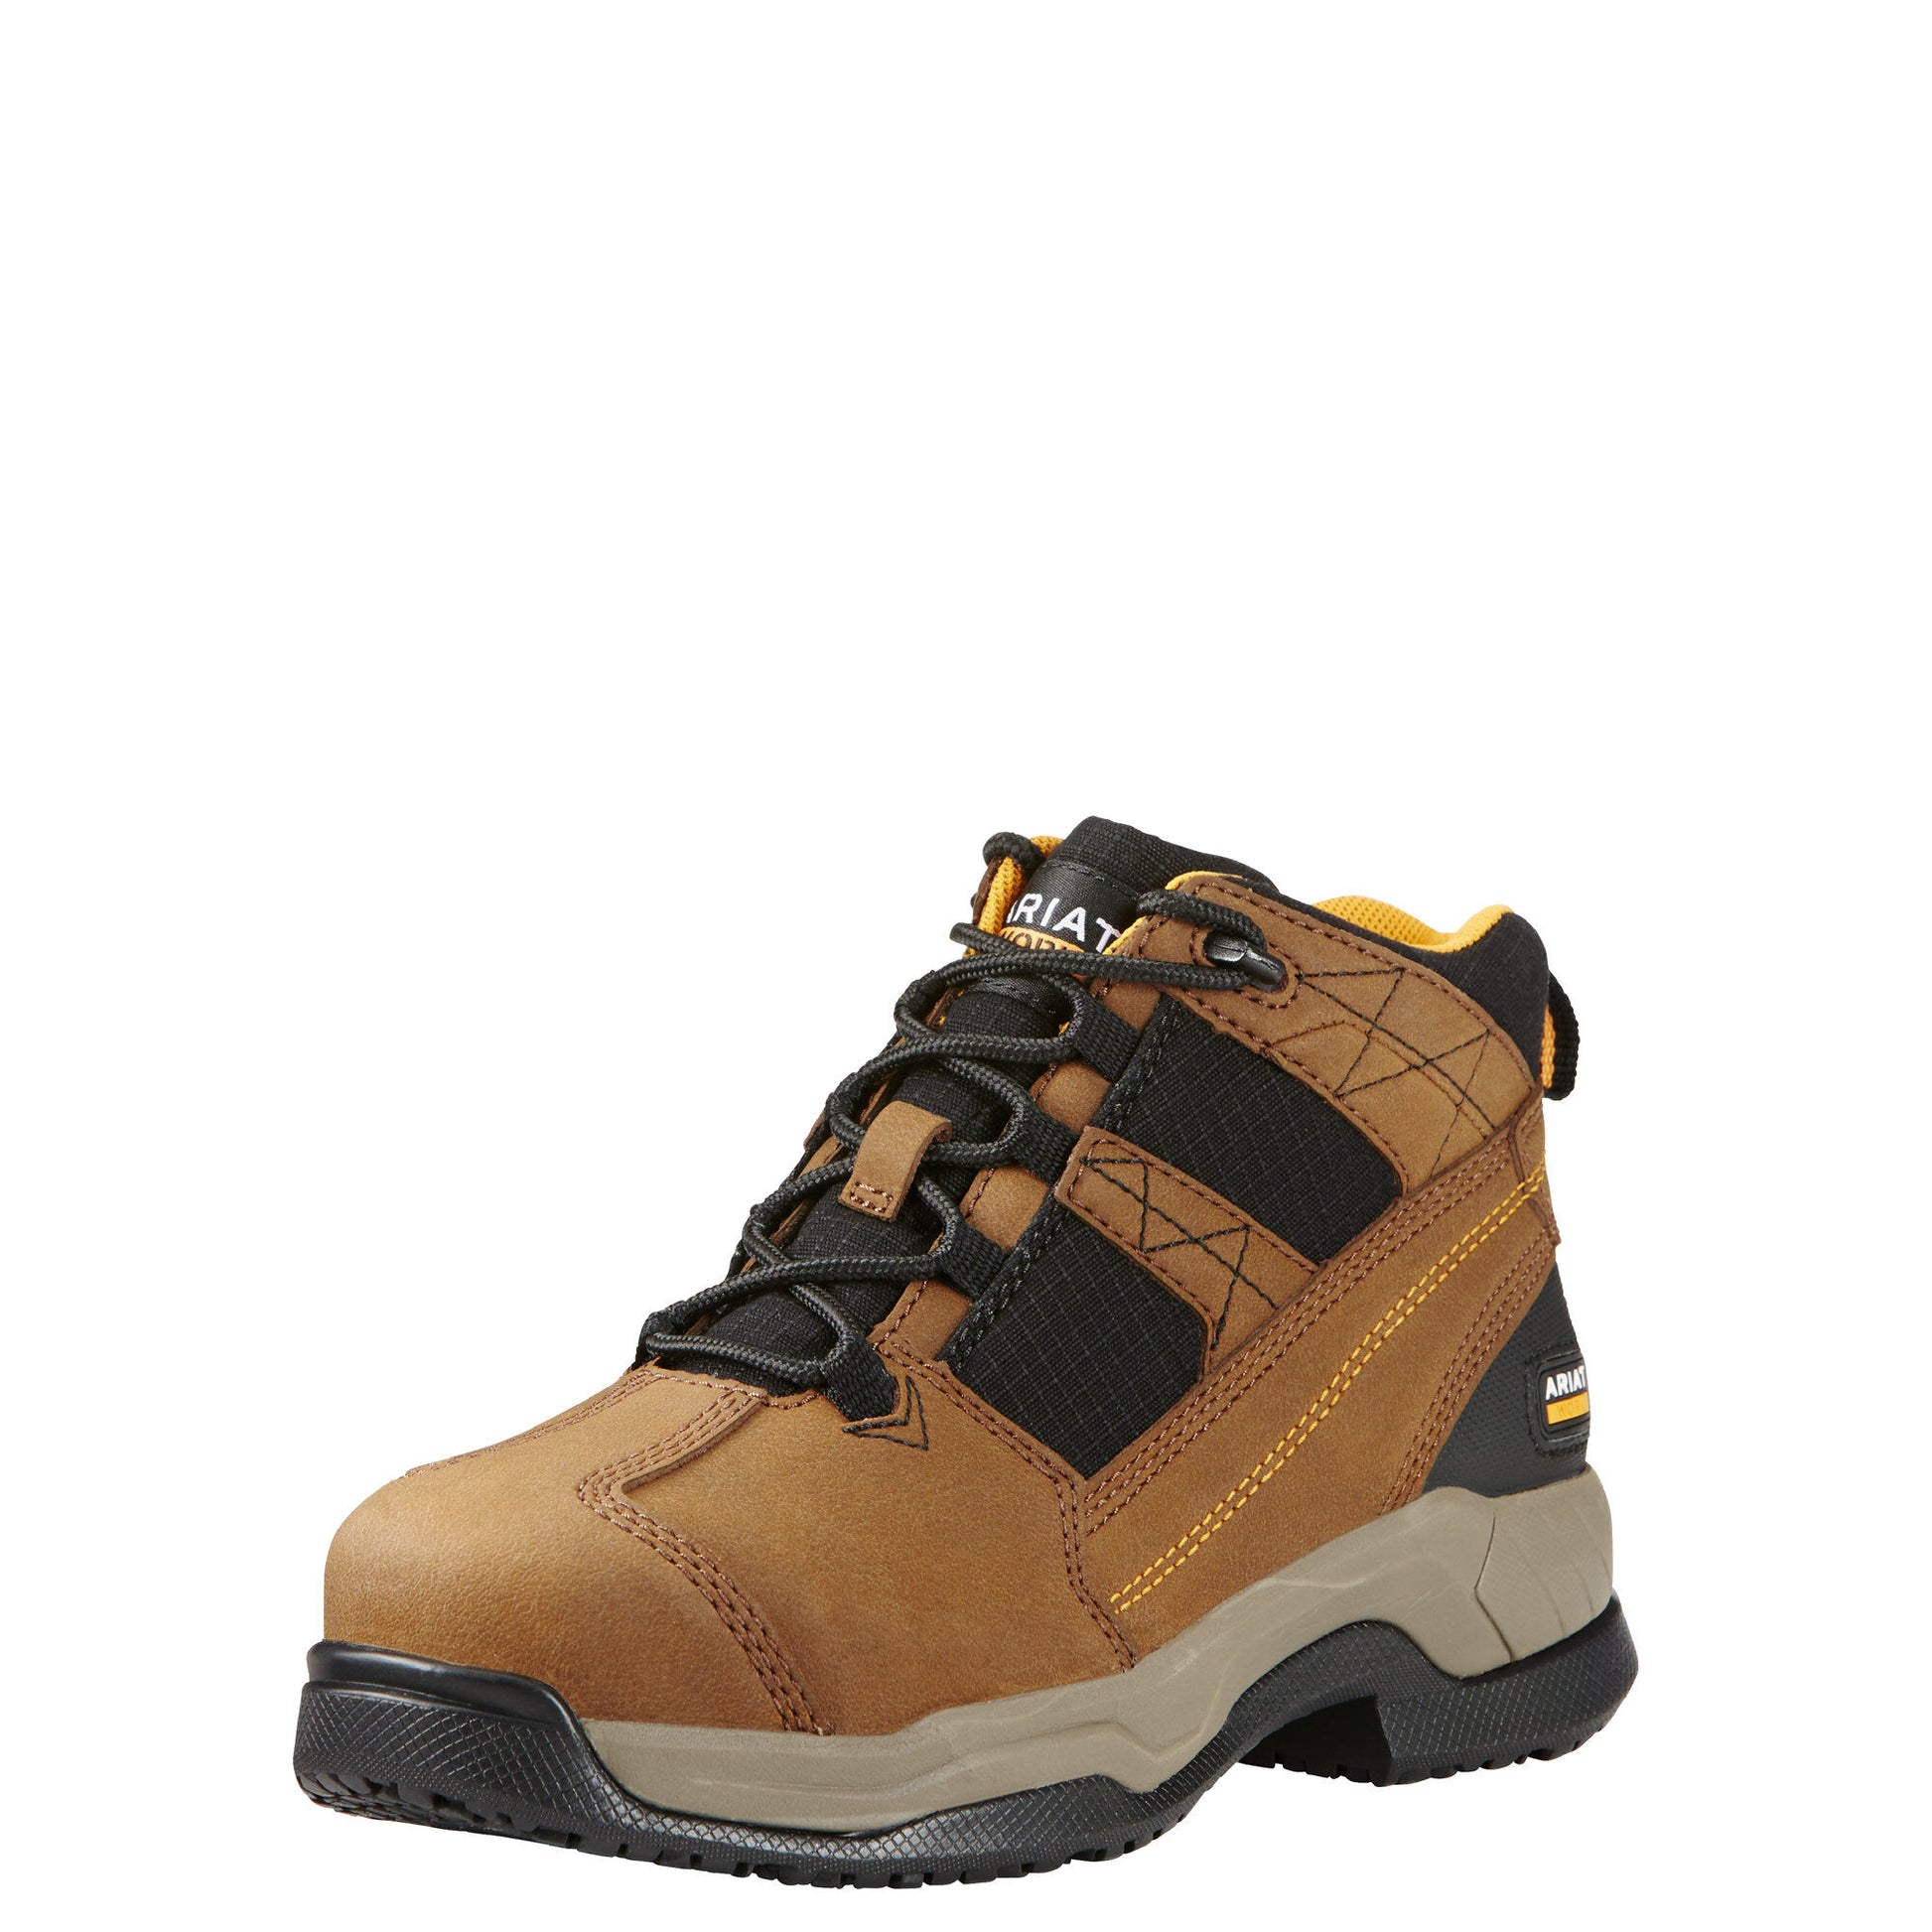 Ariat Women's Contender Steel Toe Boot - Brown - French's Boots